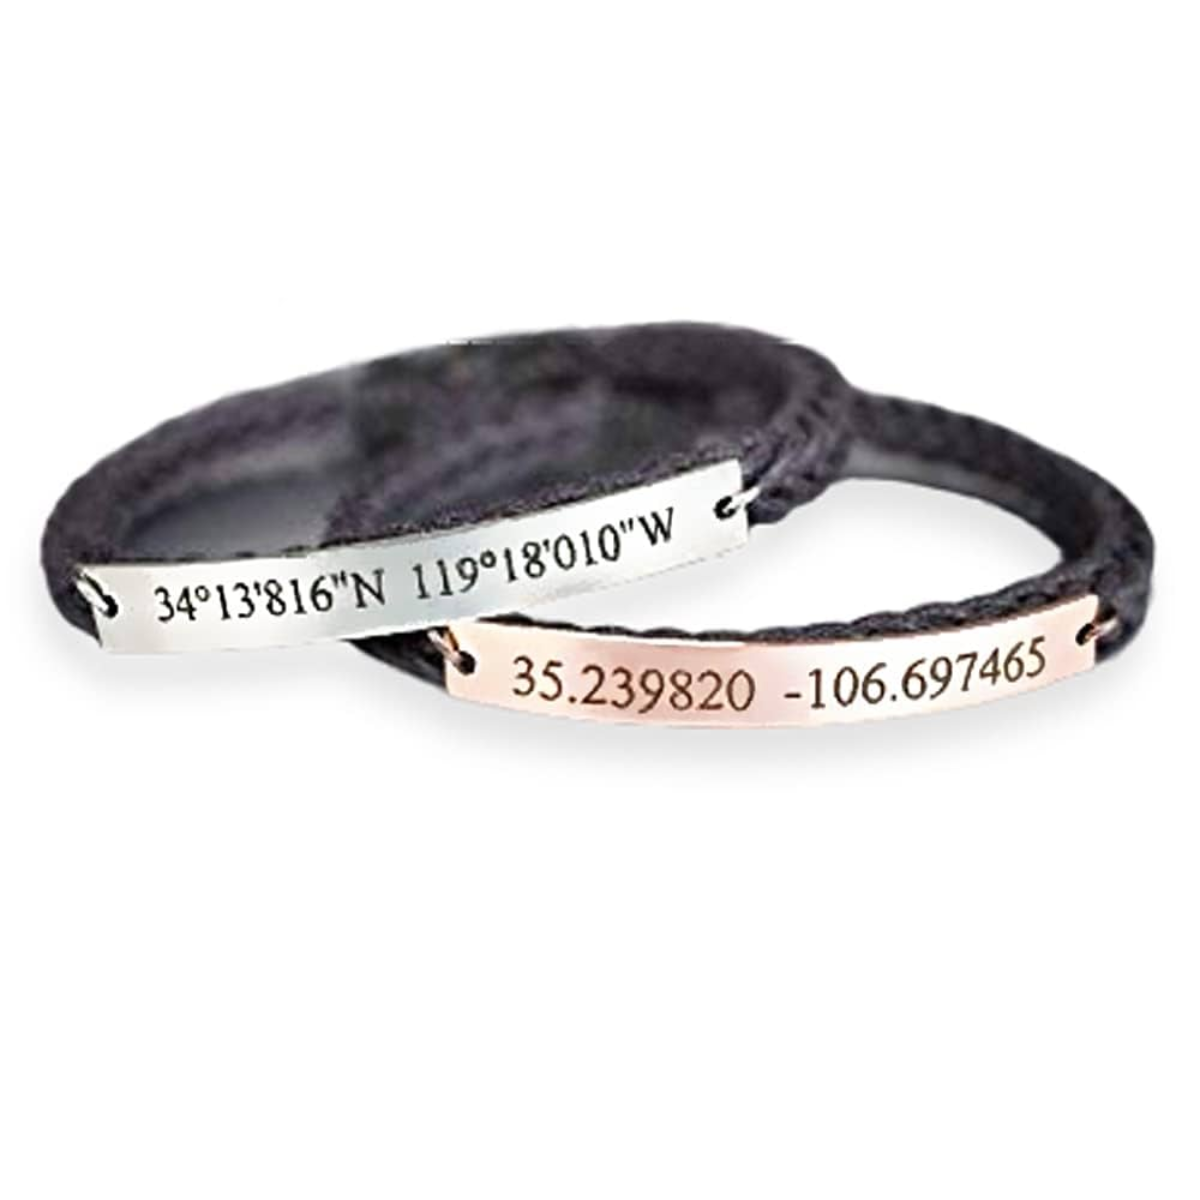 30. Handcrafted Coordinates Bracelet: A Unique and Personalized Anniversary Gift for Him